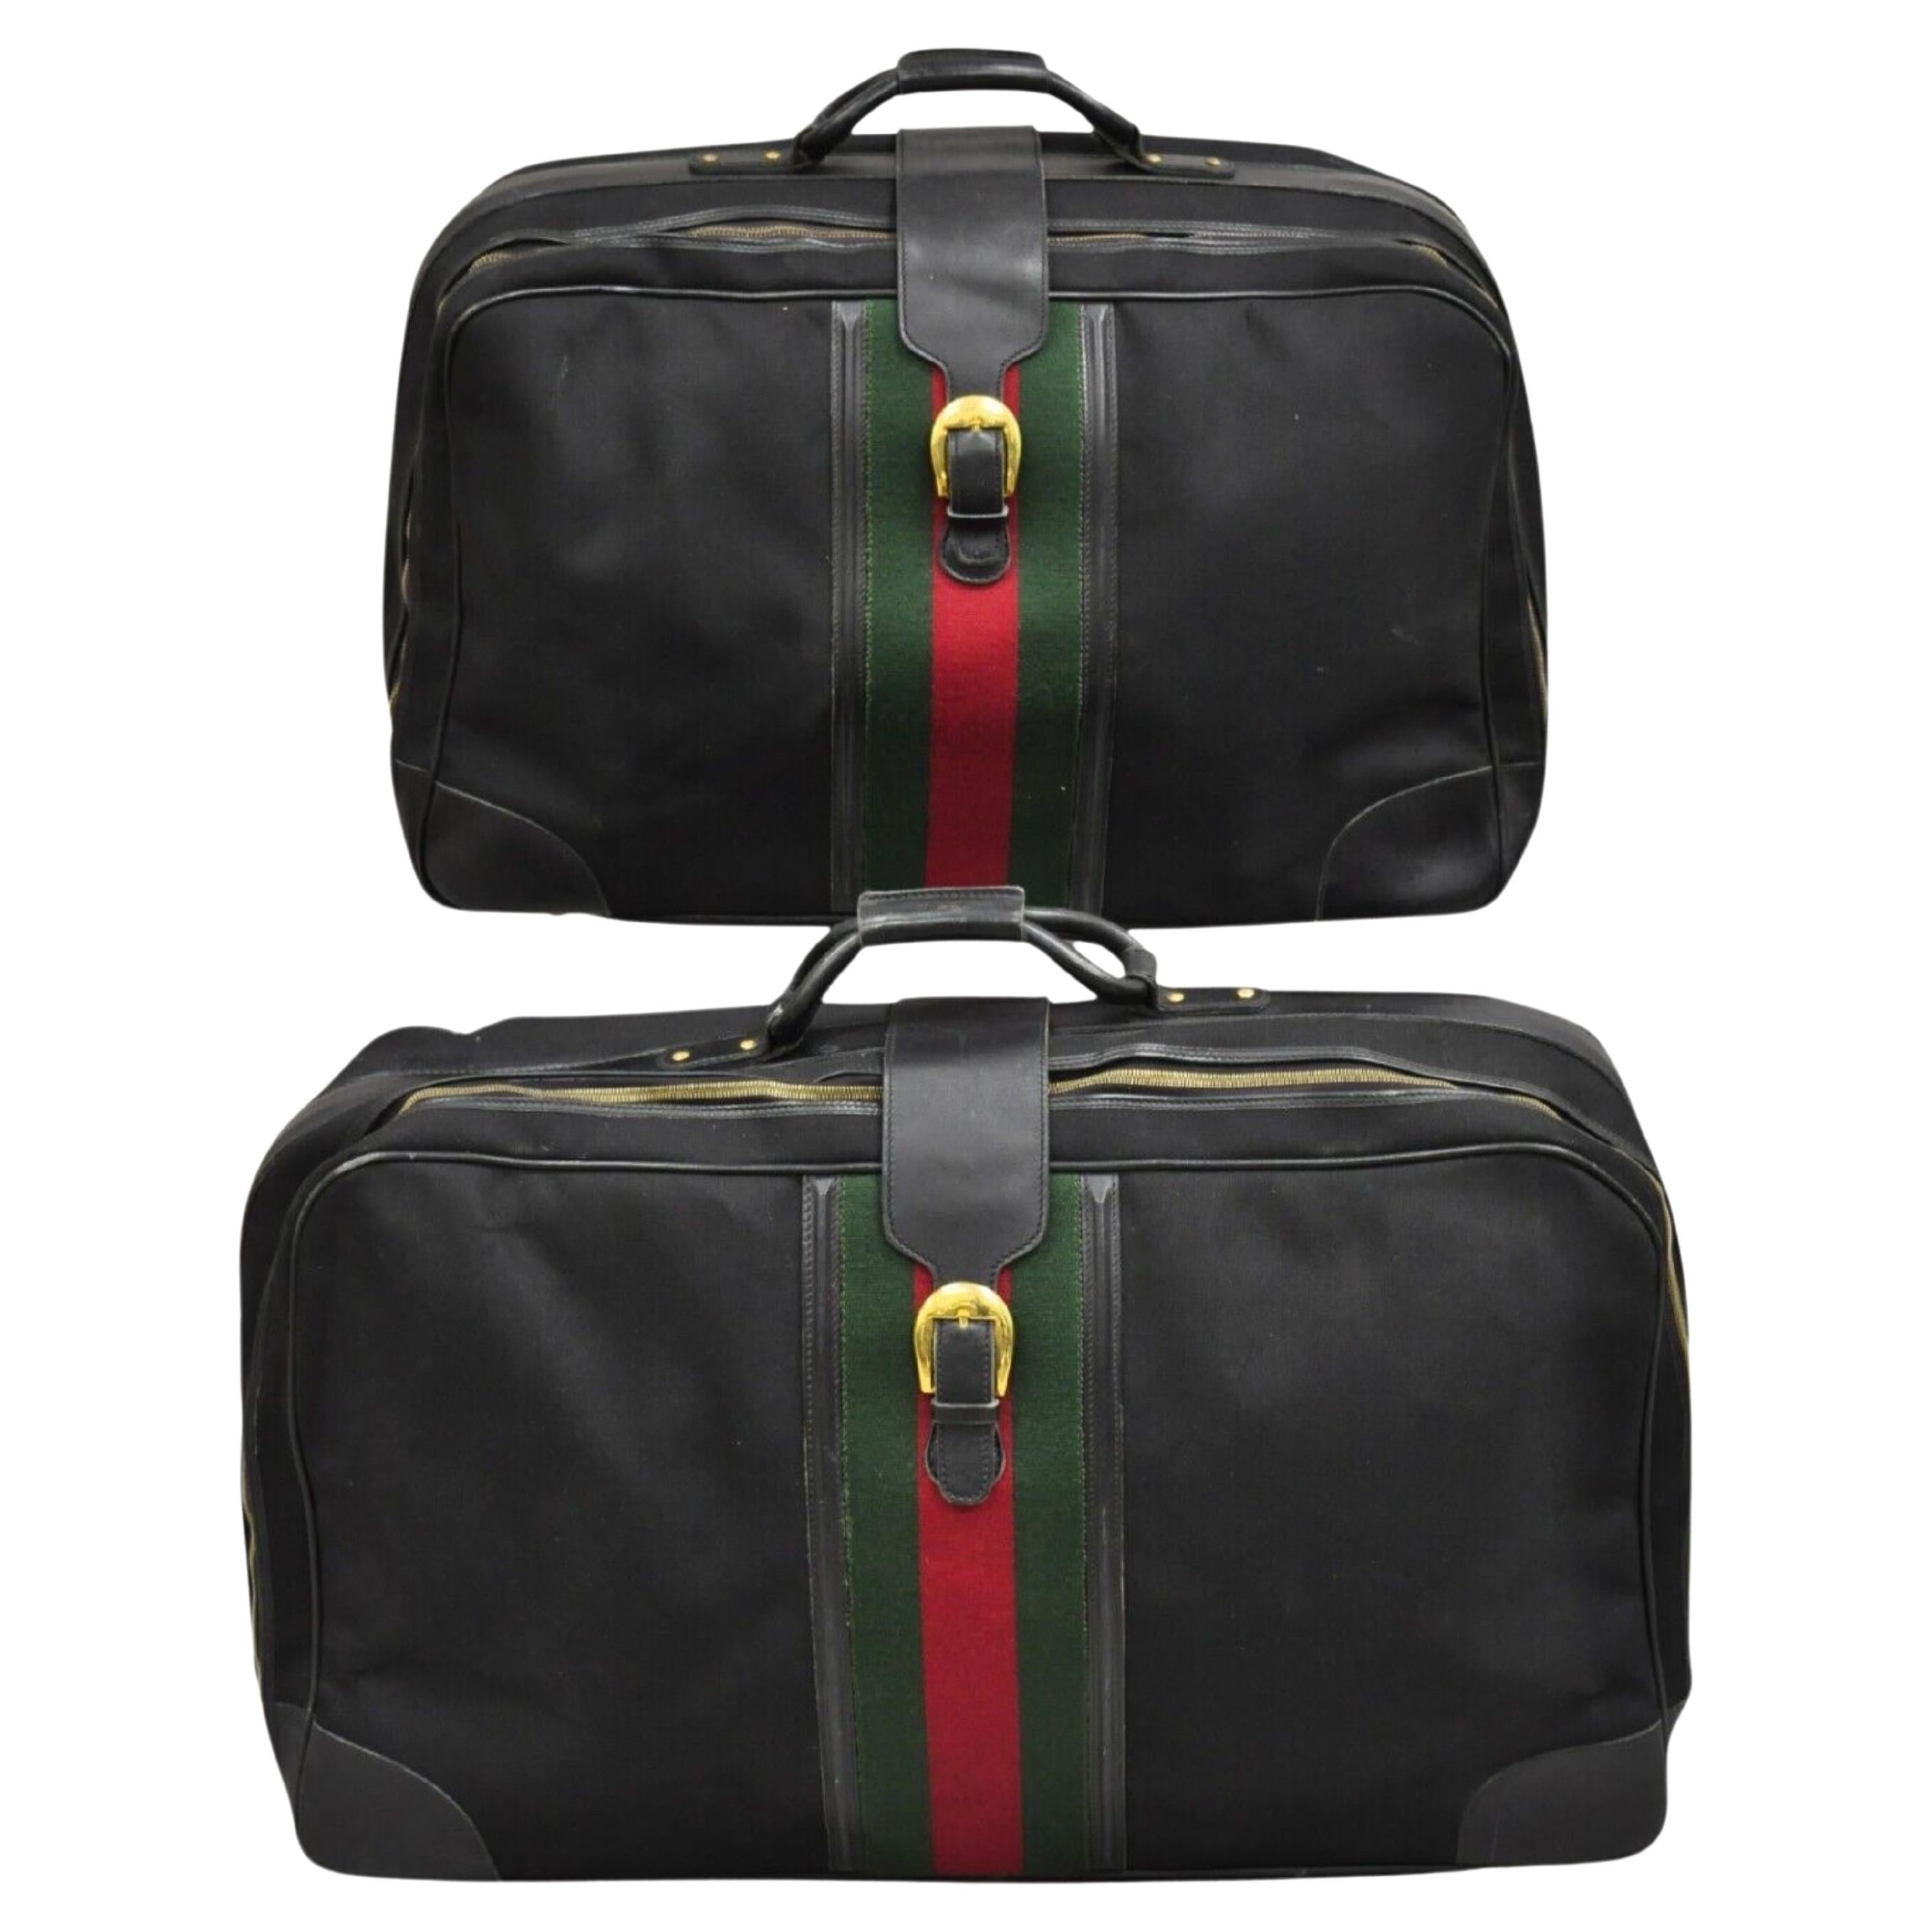 Vintage Gucci Black Canvas & Leather Suitcase Luggage His and Hers Set -2 Pc (B)